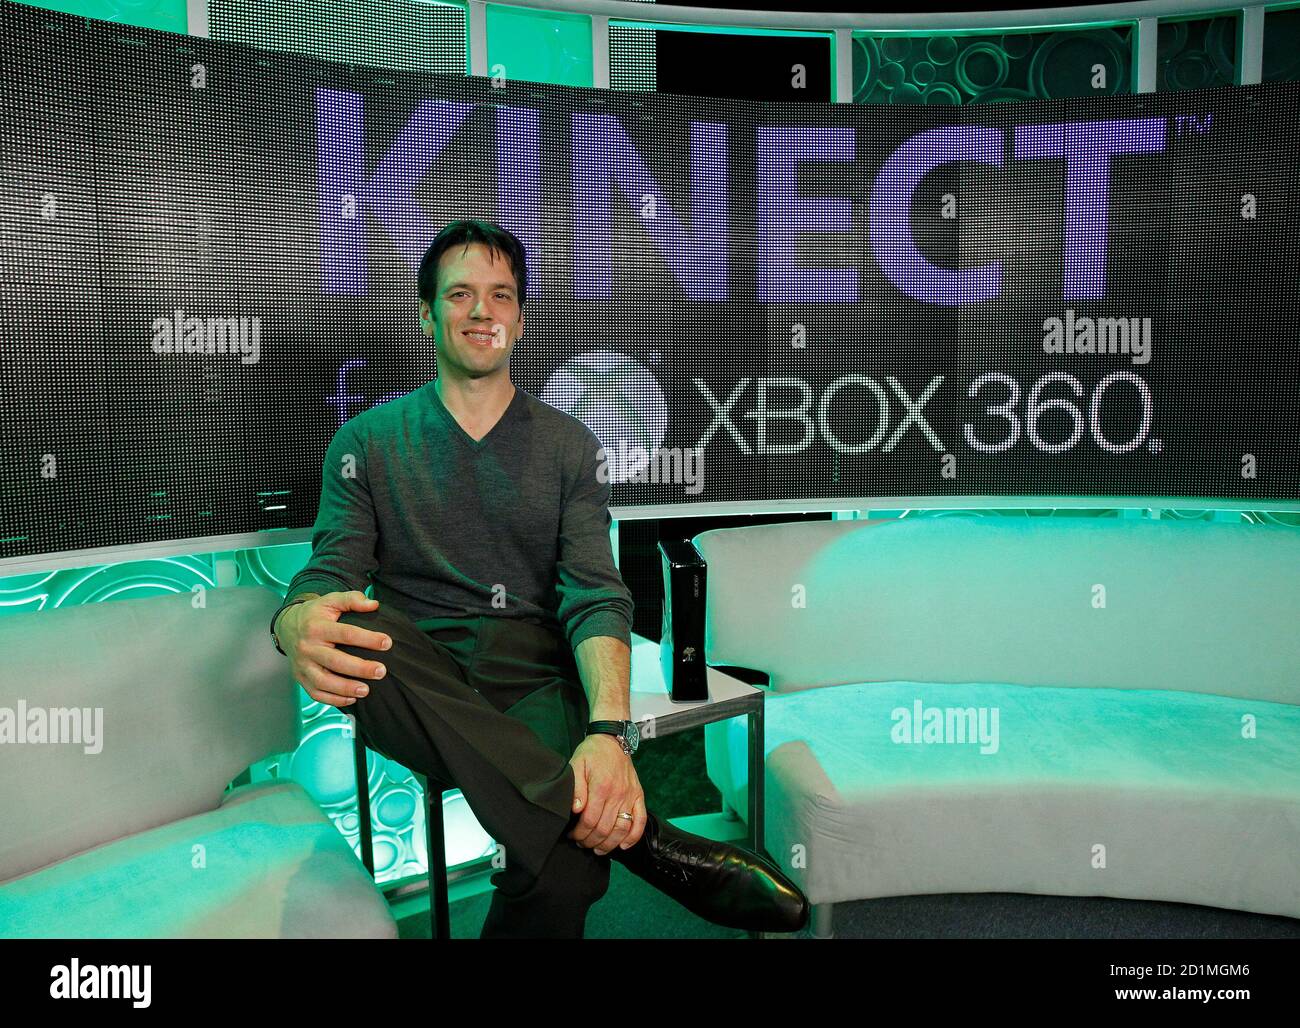 phil-spencer-corporate-vice-president-of-microsoft-game-studios-poses-after-the-xbox-360-media-briefing-at-the-wiltern-theatre-in-los-angeles-june-14-2010-microsoft-corp-christening-its-new-motion-sensing-game-system-kinect-on-sunday-offered-a-sneak-peek-of-upcoming-titles-it-hopes-will-help-draw-a-new-generation-of-casual-players-into-the-40-million-strong-xbox-game-console-fold-reuters-mario-anzuoni-united-states-tags-society-sci-tech-2d1mgm6.jpg